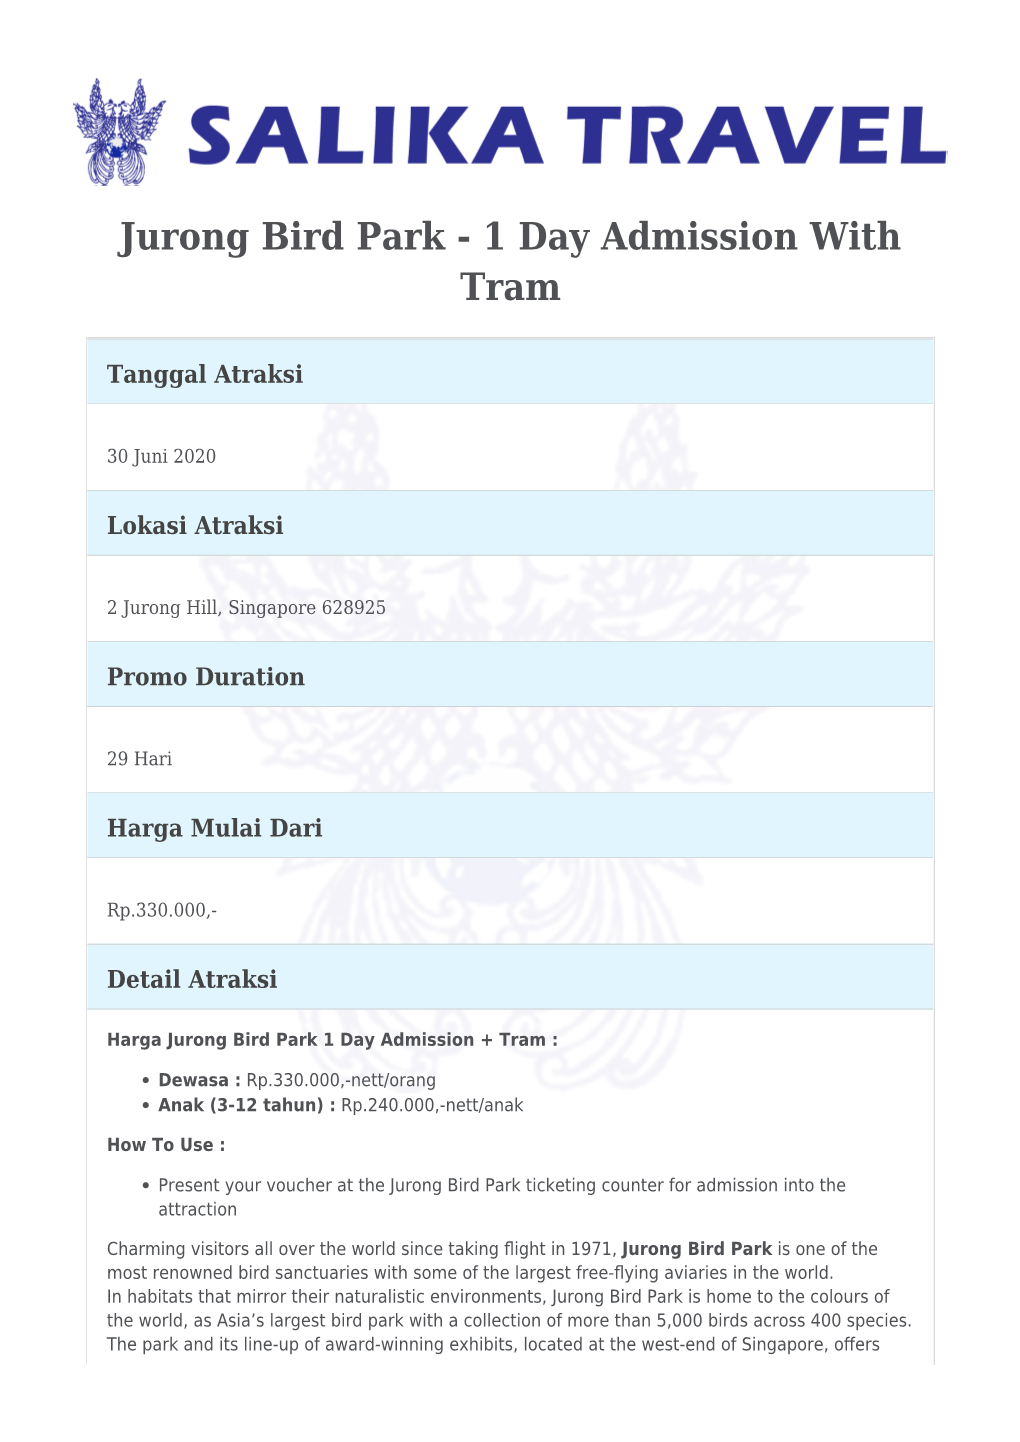 Jurong Bird Park - 1 Day Admission with Tram